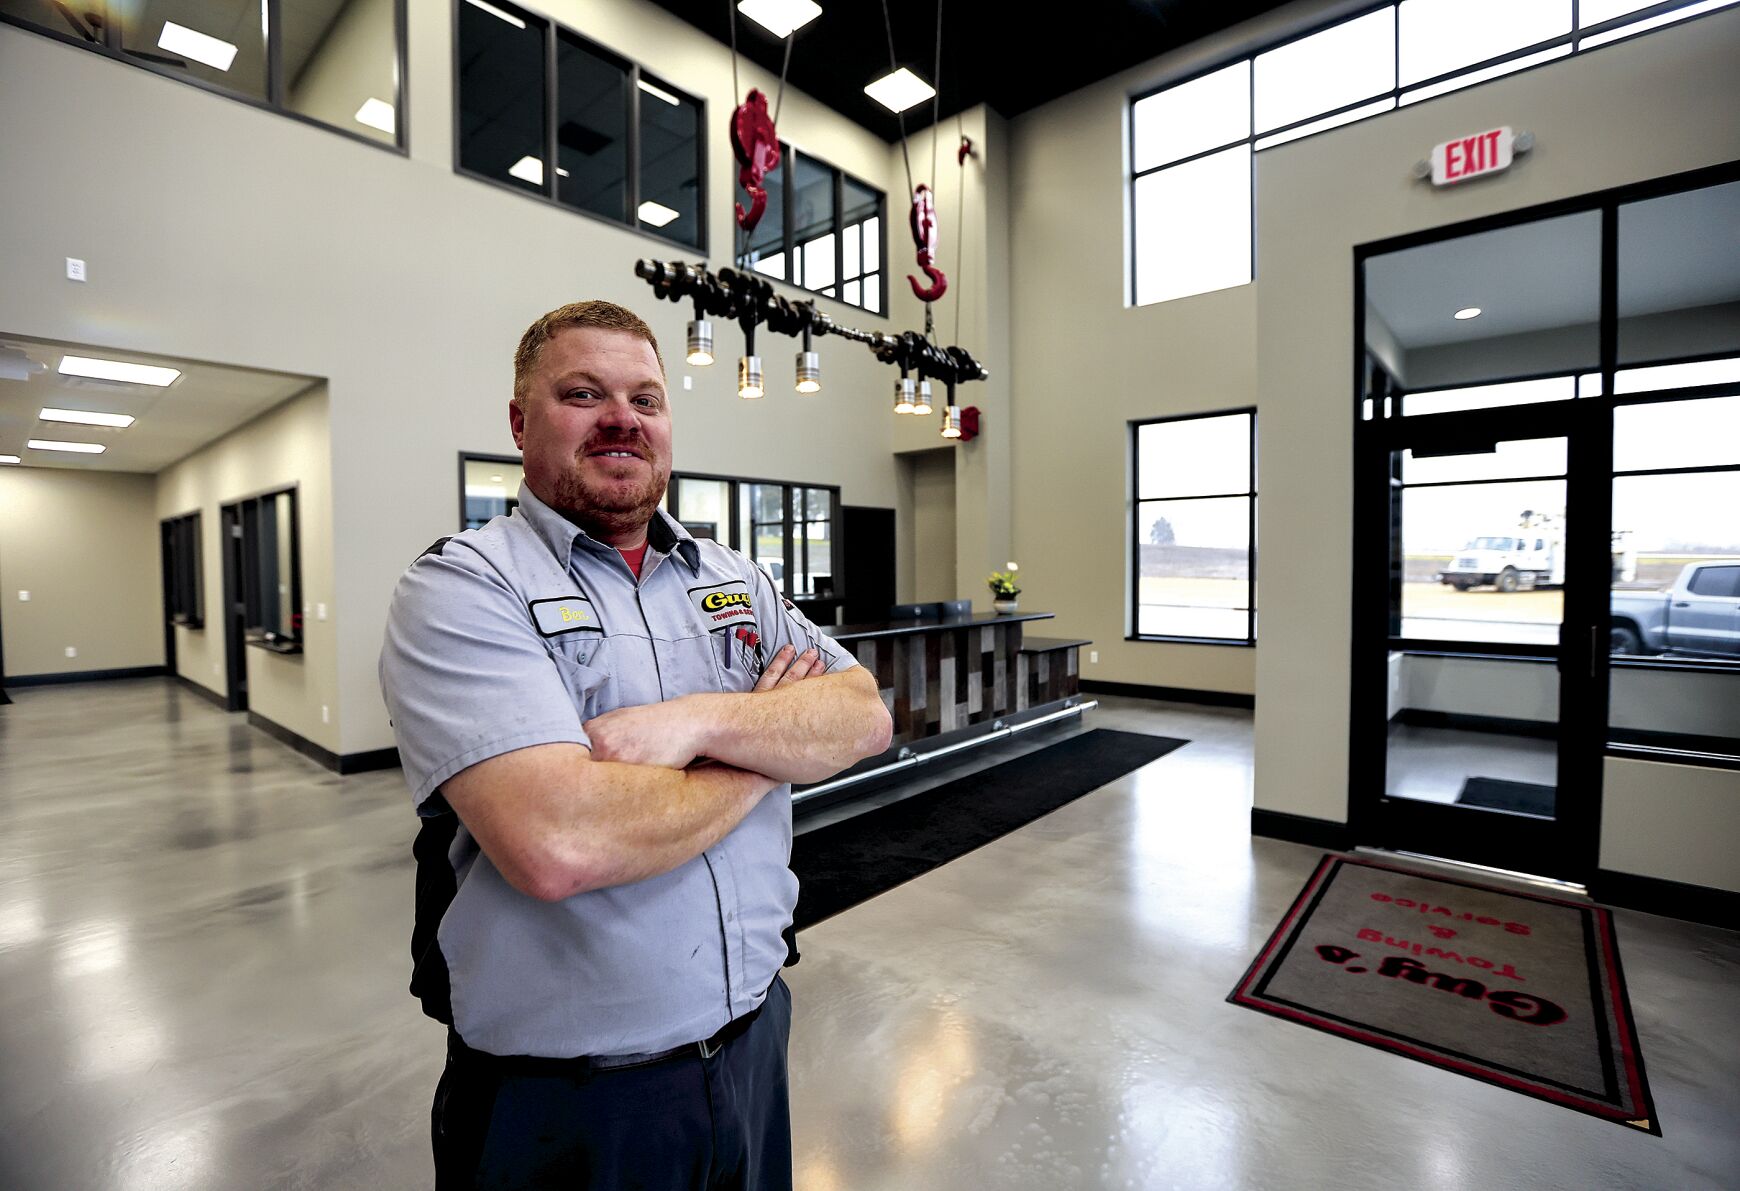 Ben Richard is co-owner of Guy’s Towing & Service located in Galena, Ill. The longtime family business has opened a new 21,000-square-foot building in Galena specializing in repairs and maintenance for trucks, trailers and heavy machinery.    PHOTO CREDIT: Dave Kettering